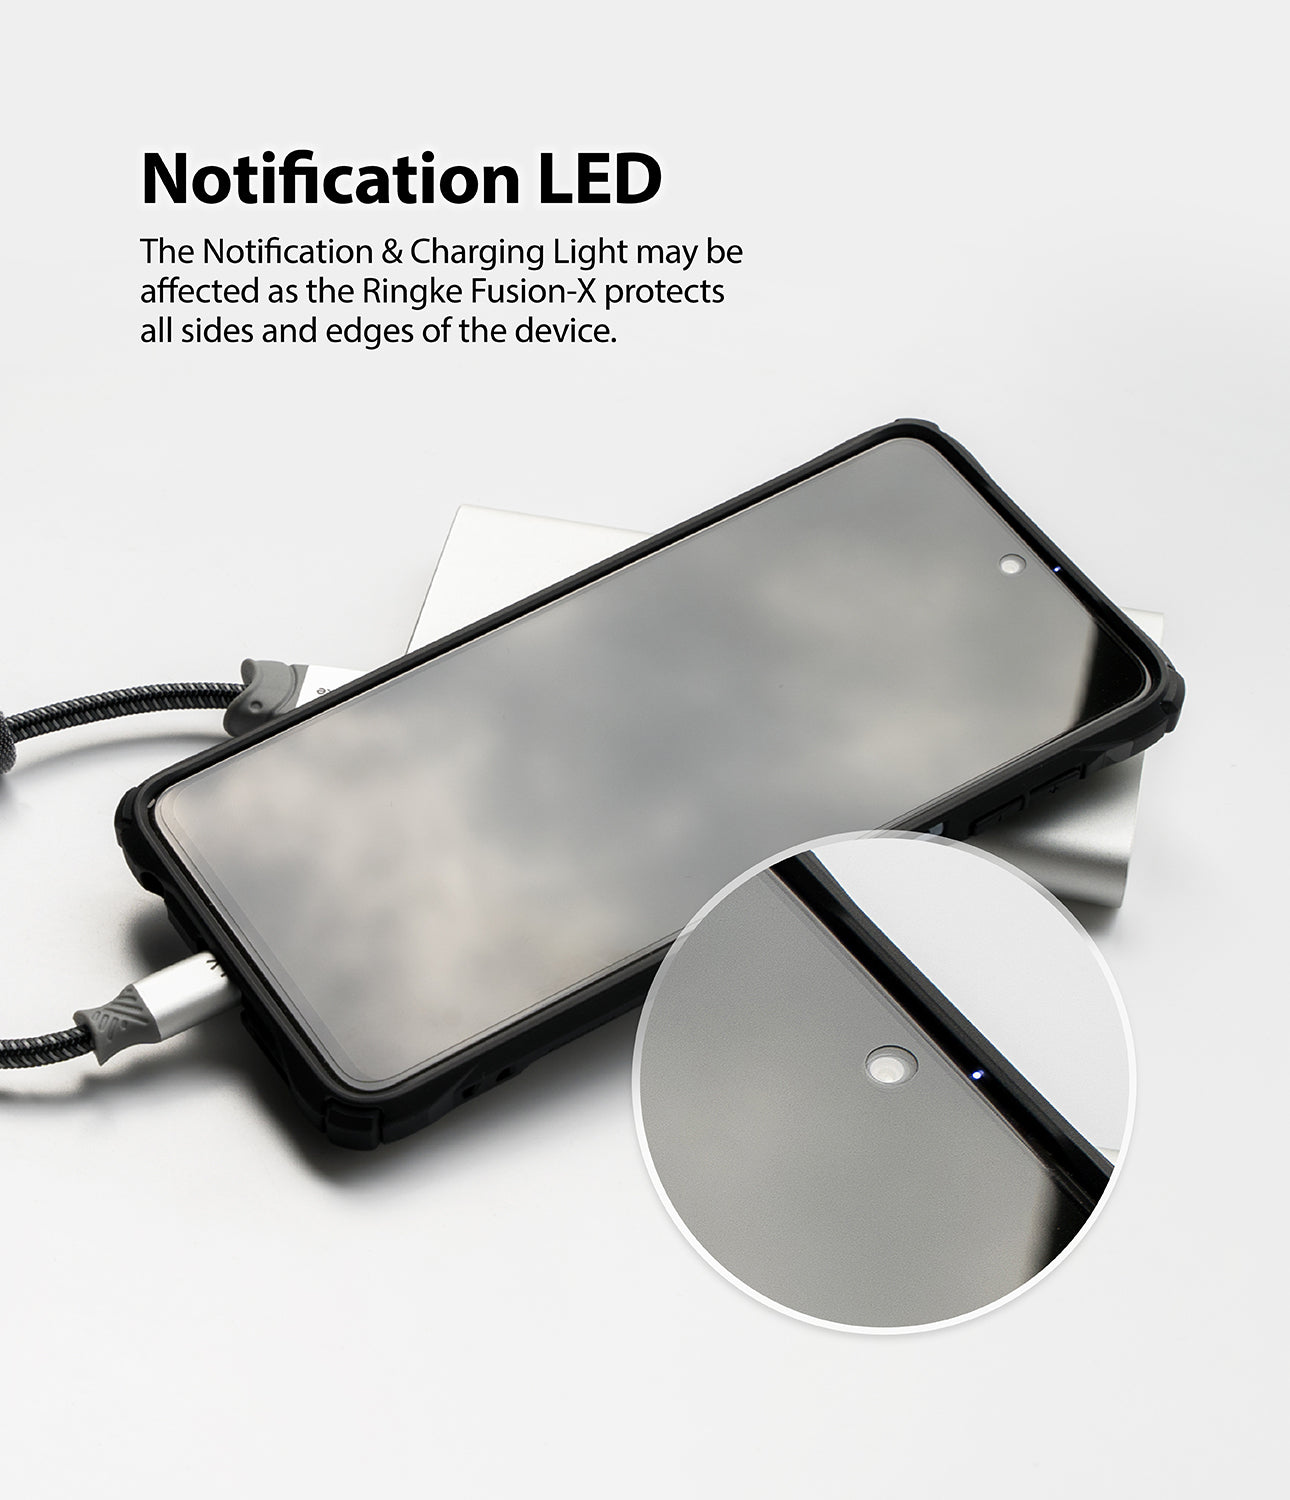 notification LED may be affected by the case 